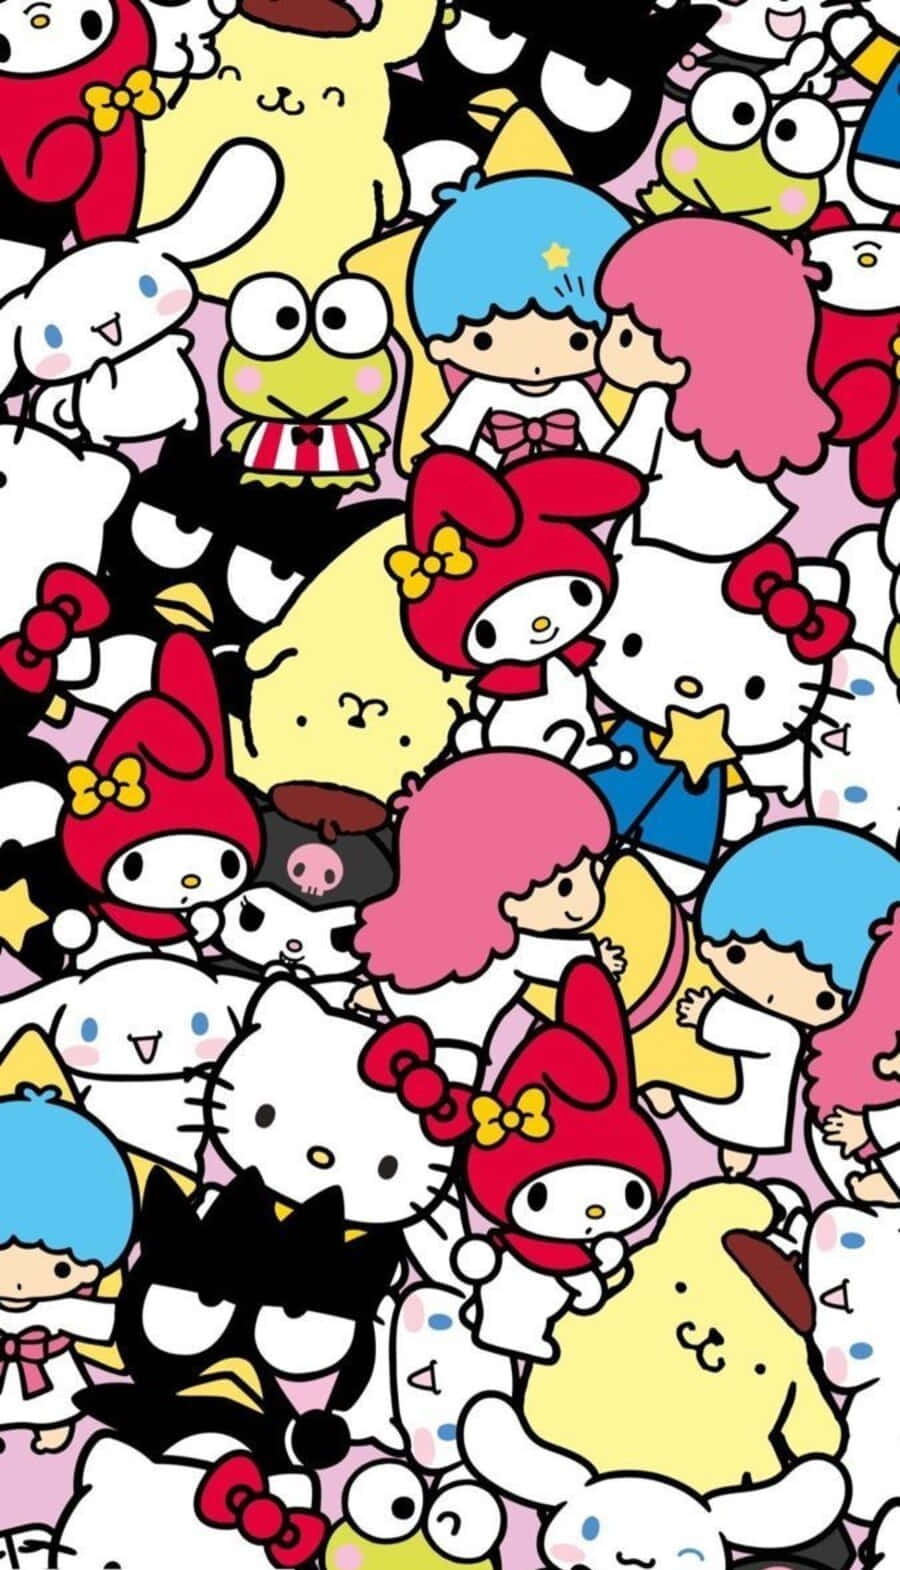  Be Positive   SANRIO FRIENDS WALLPAPERS